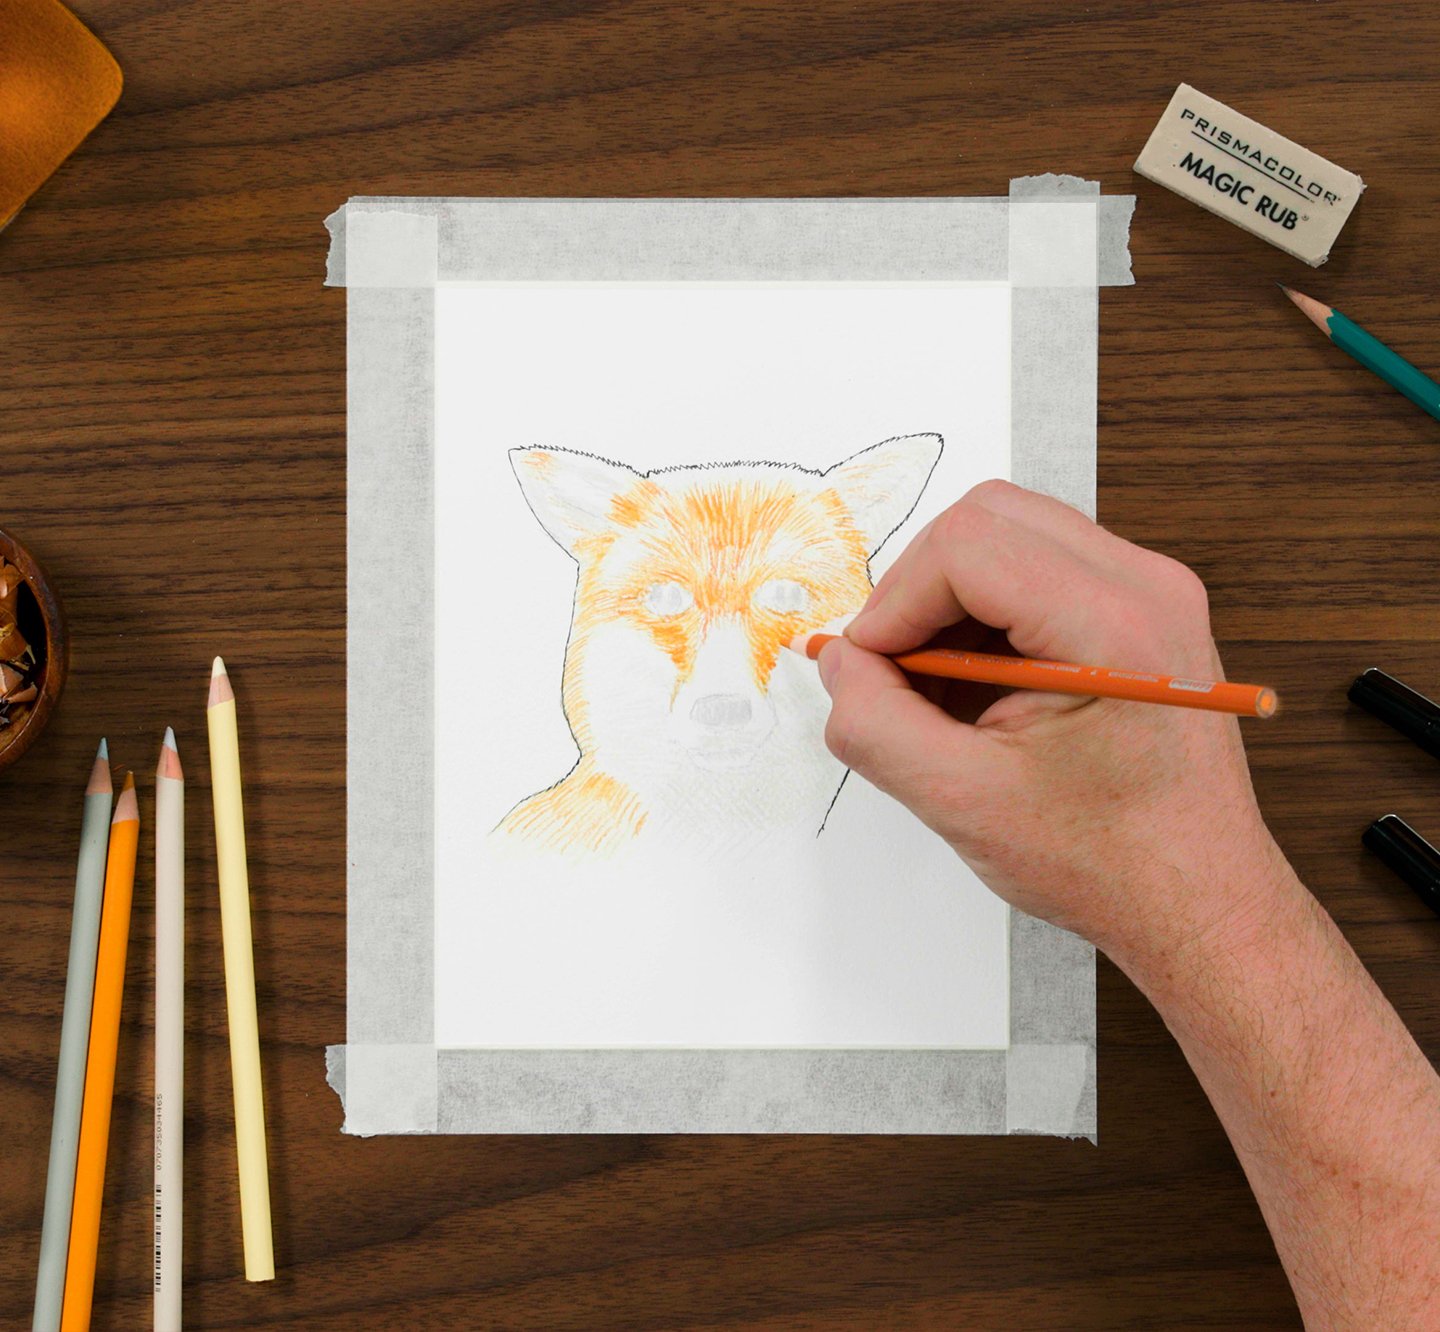 Build your drawing skills this summer with Prismacolor Technique onlin